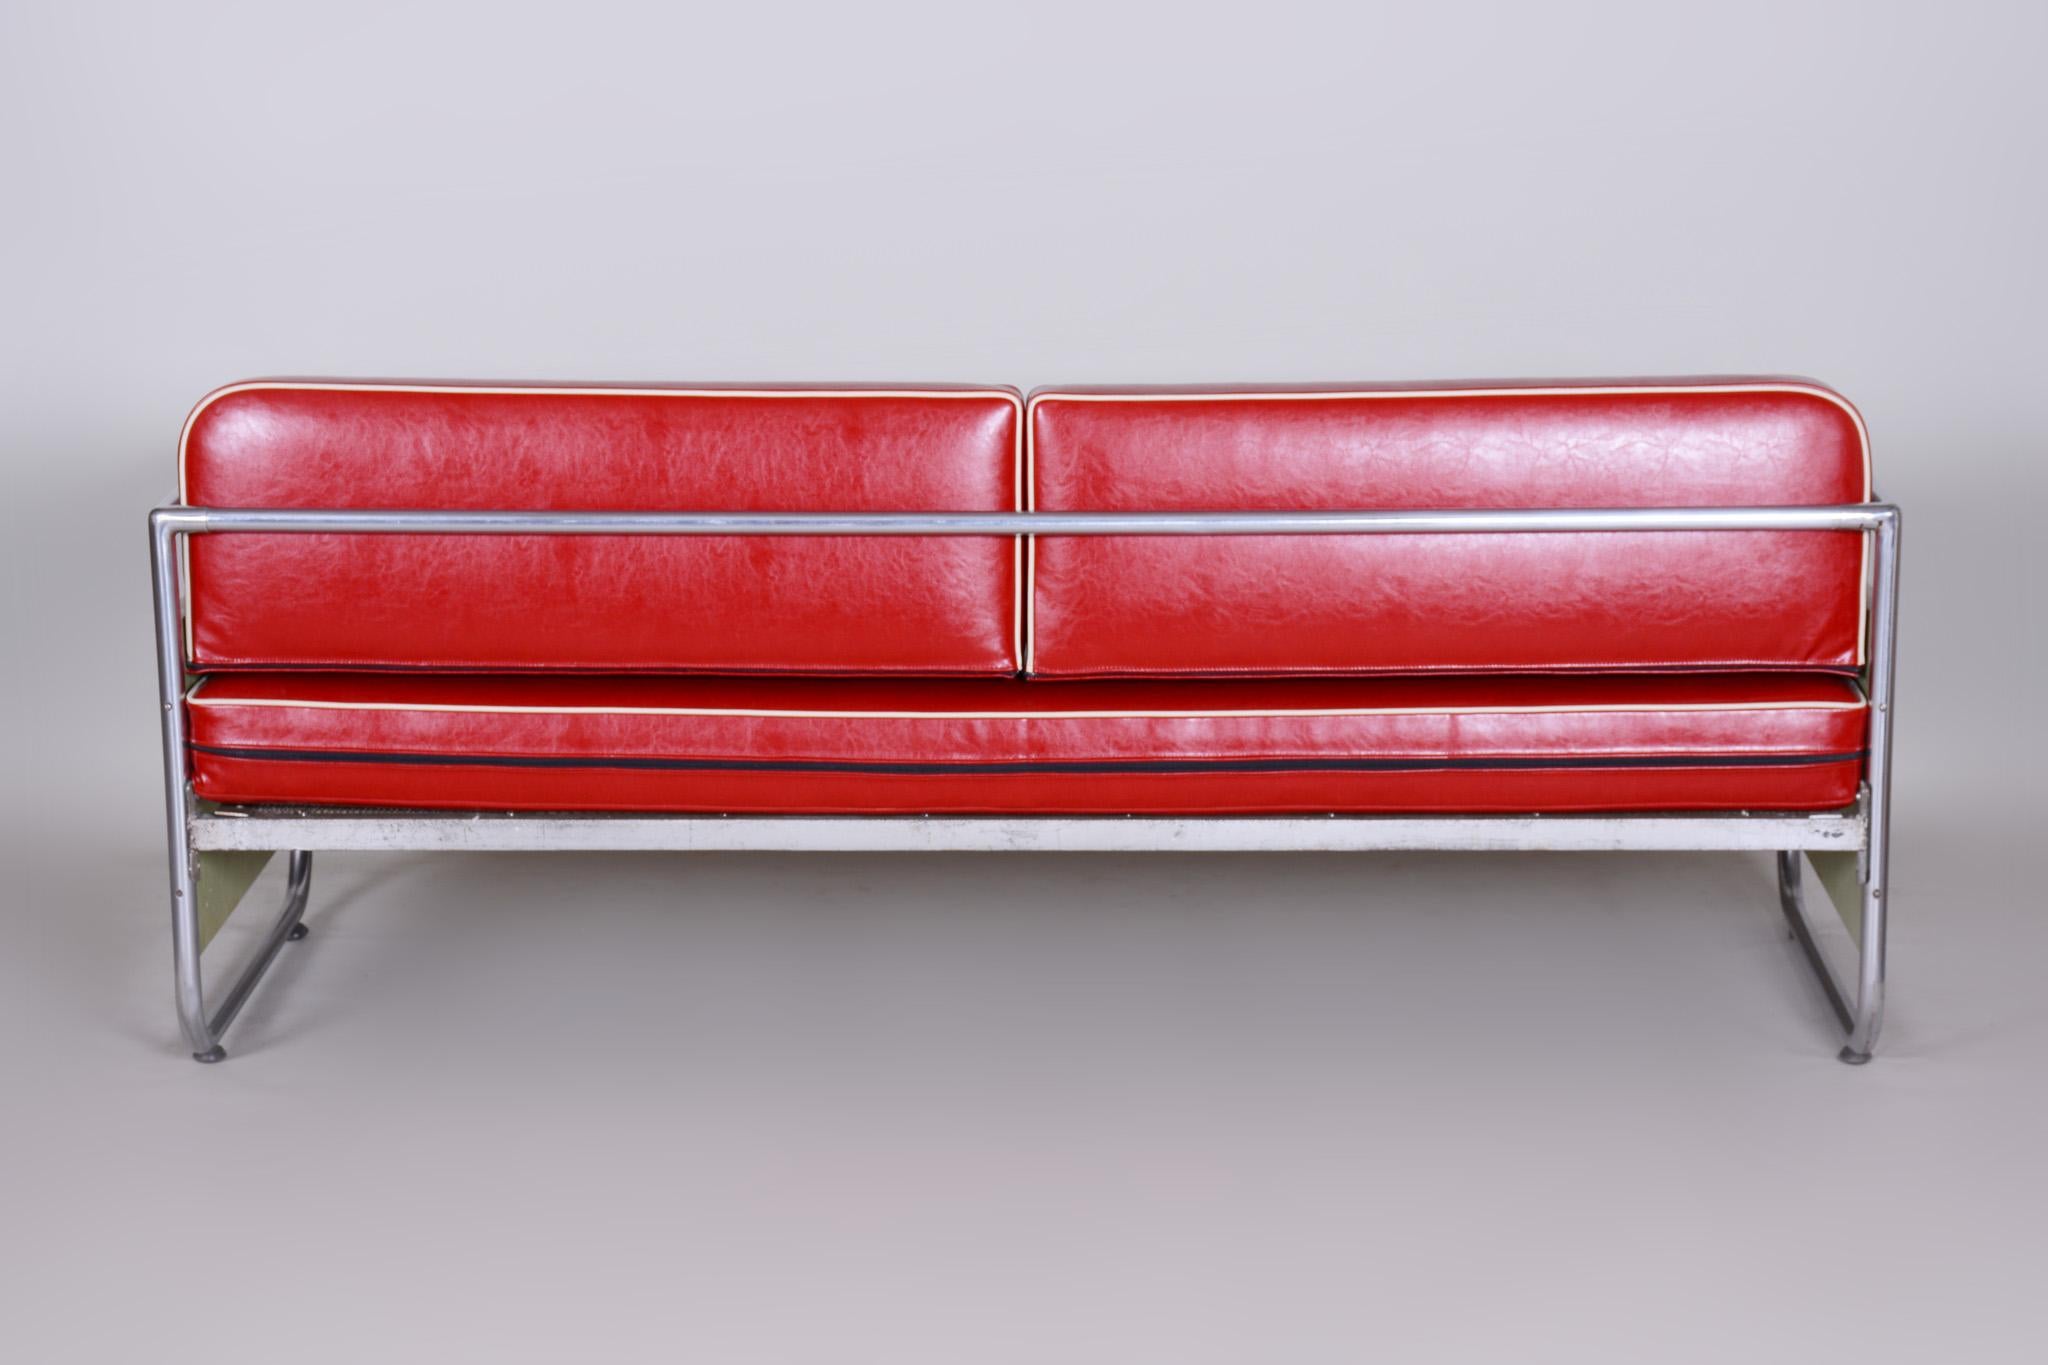 Fully Restored Bauhaus Leather and Chrome Sofa by Vichr a Spol, 1930s Czechia For Sale 1